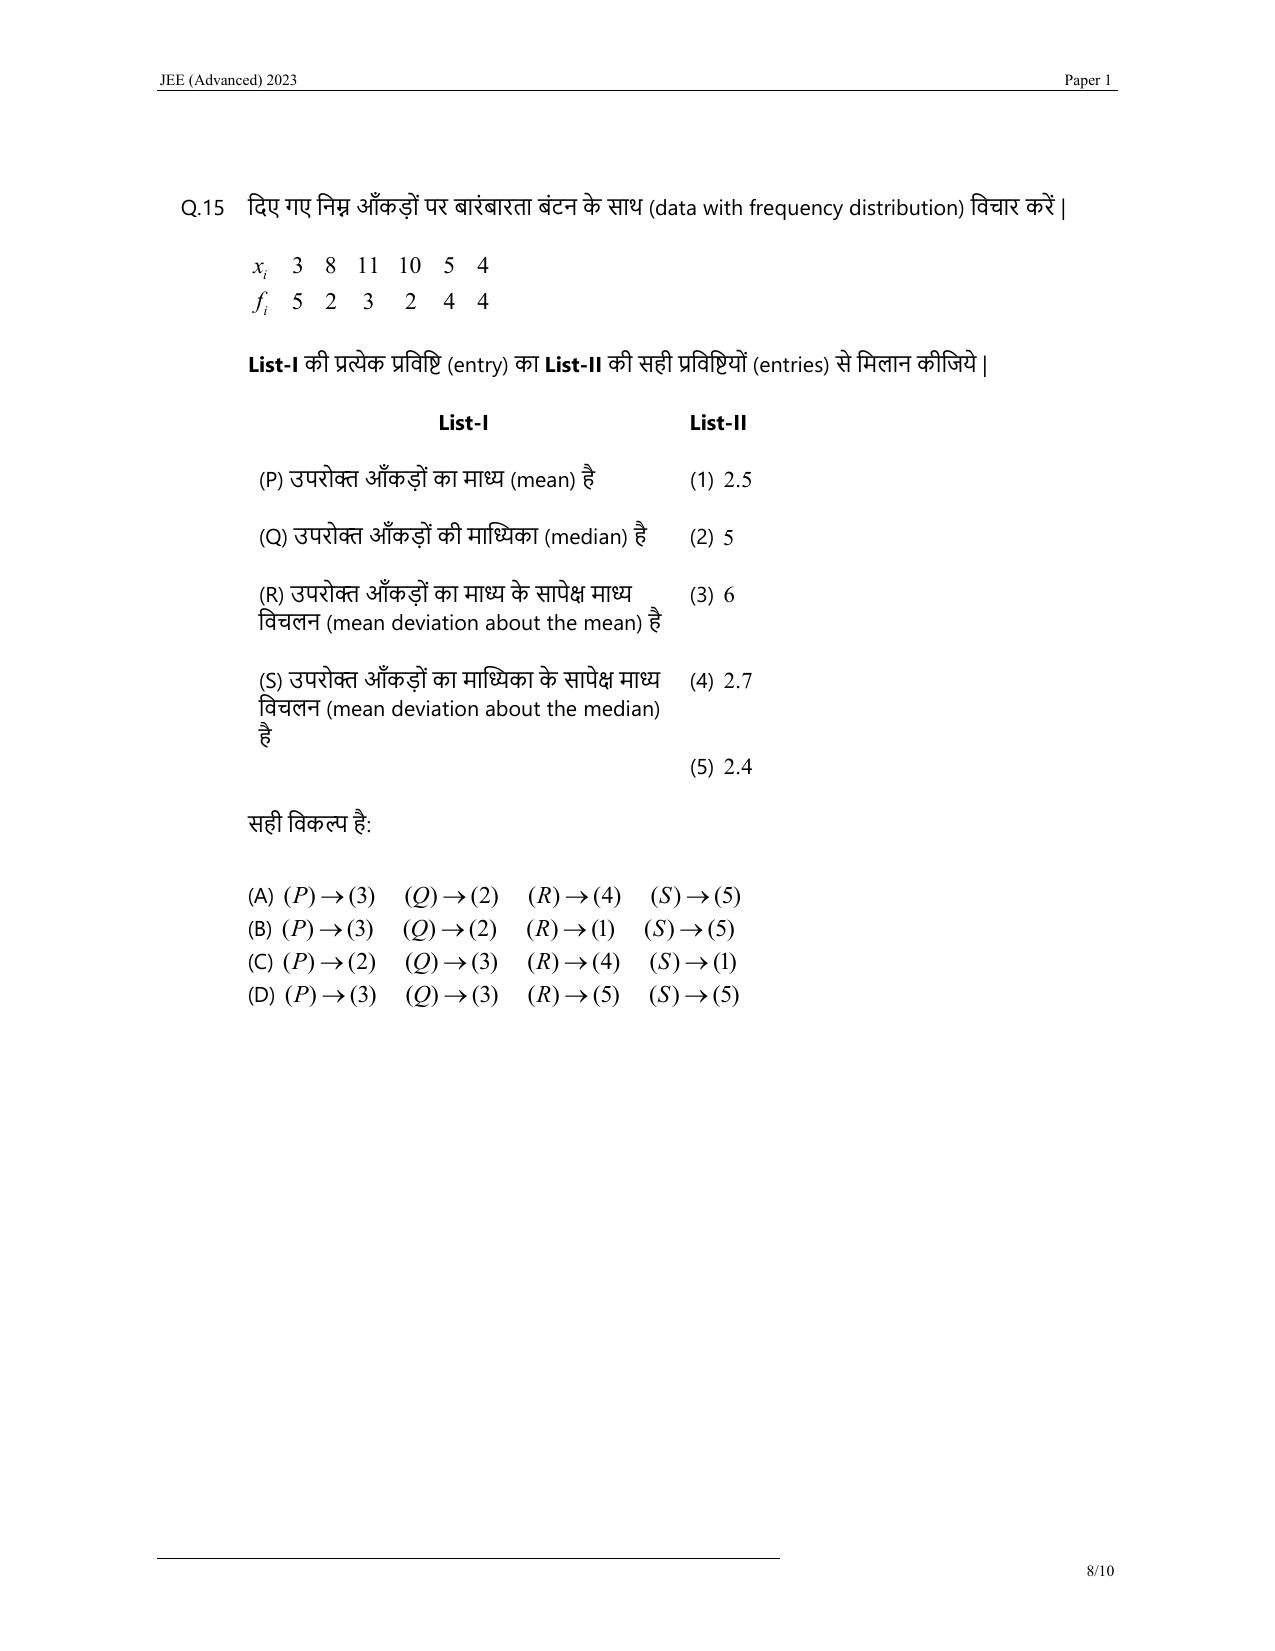 JEE Advanced 2023 Question Paper 1 (Hindi) - Page 8